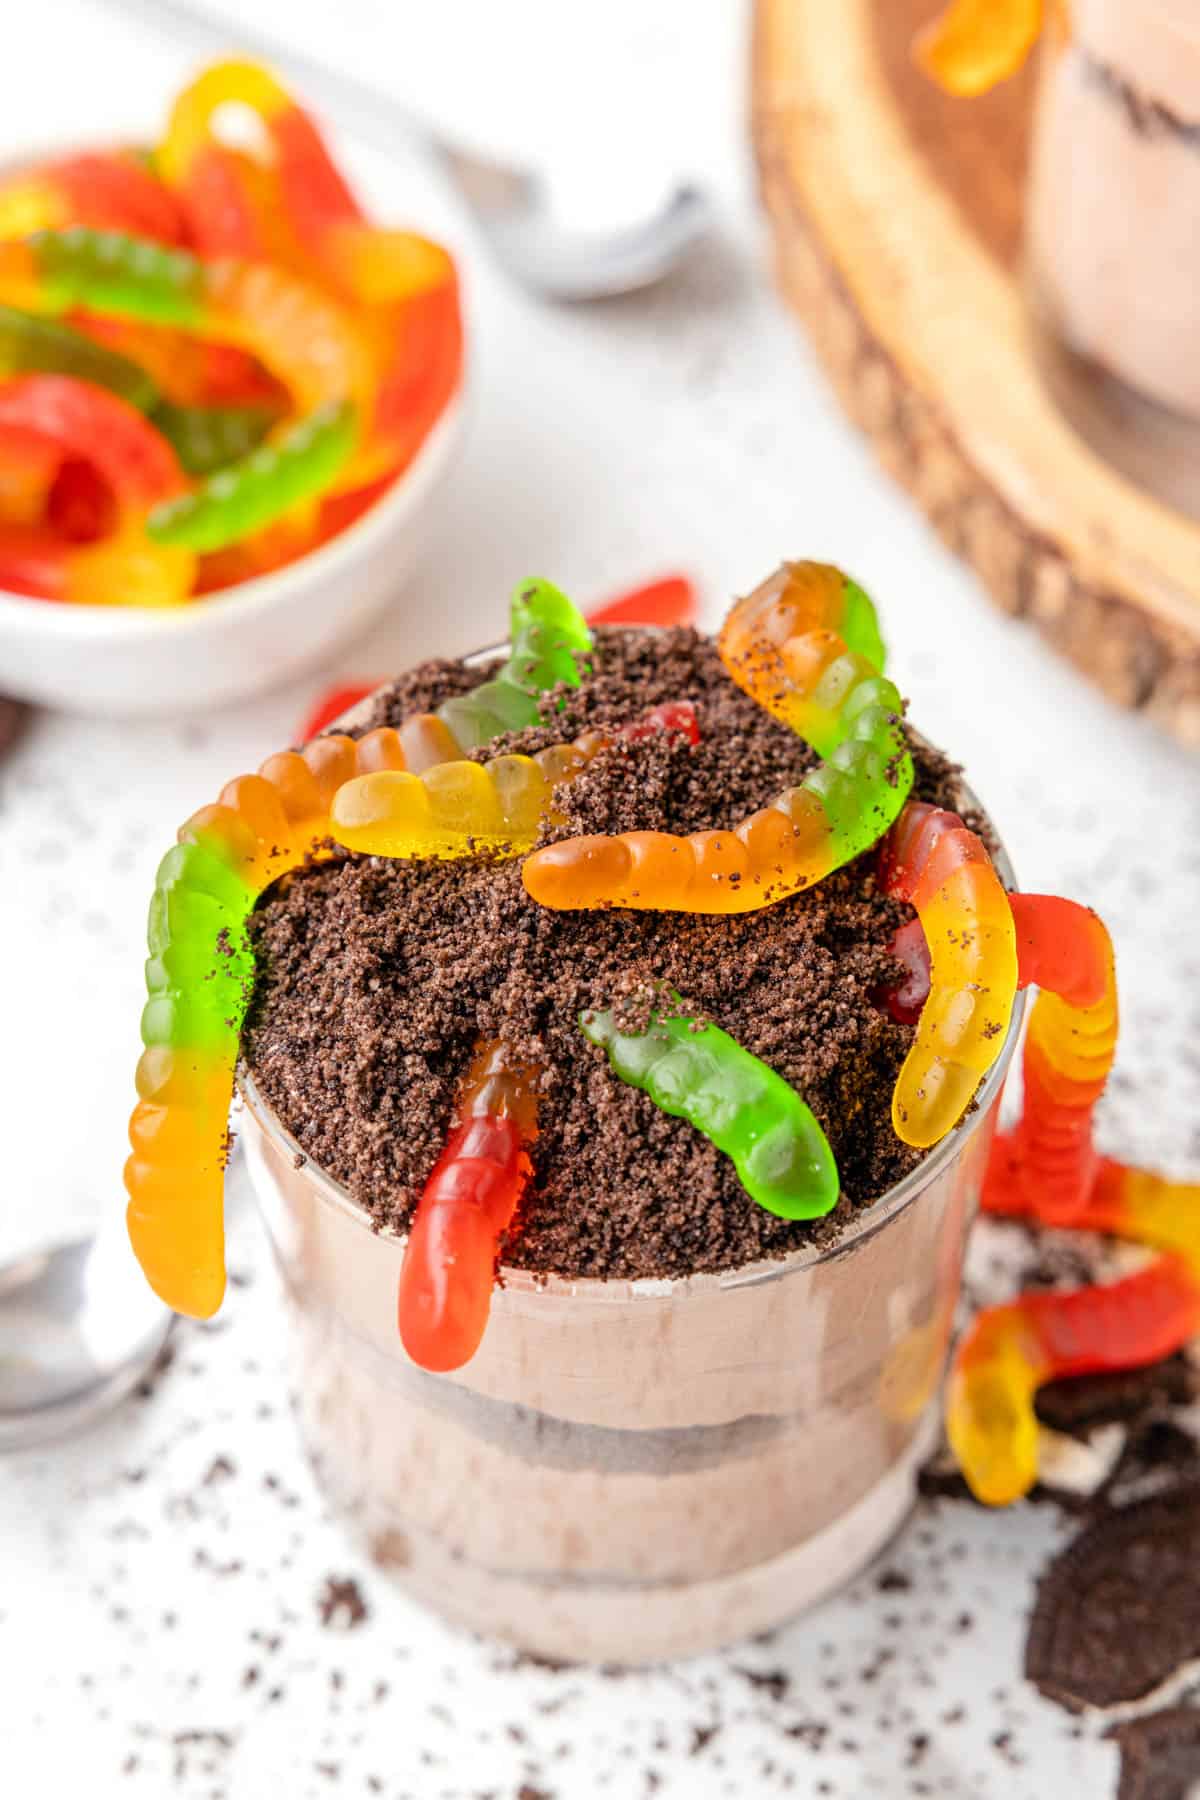 A chocolate pudding dirt cup dessert with gummy worms on top.